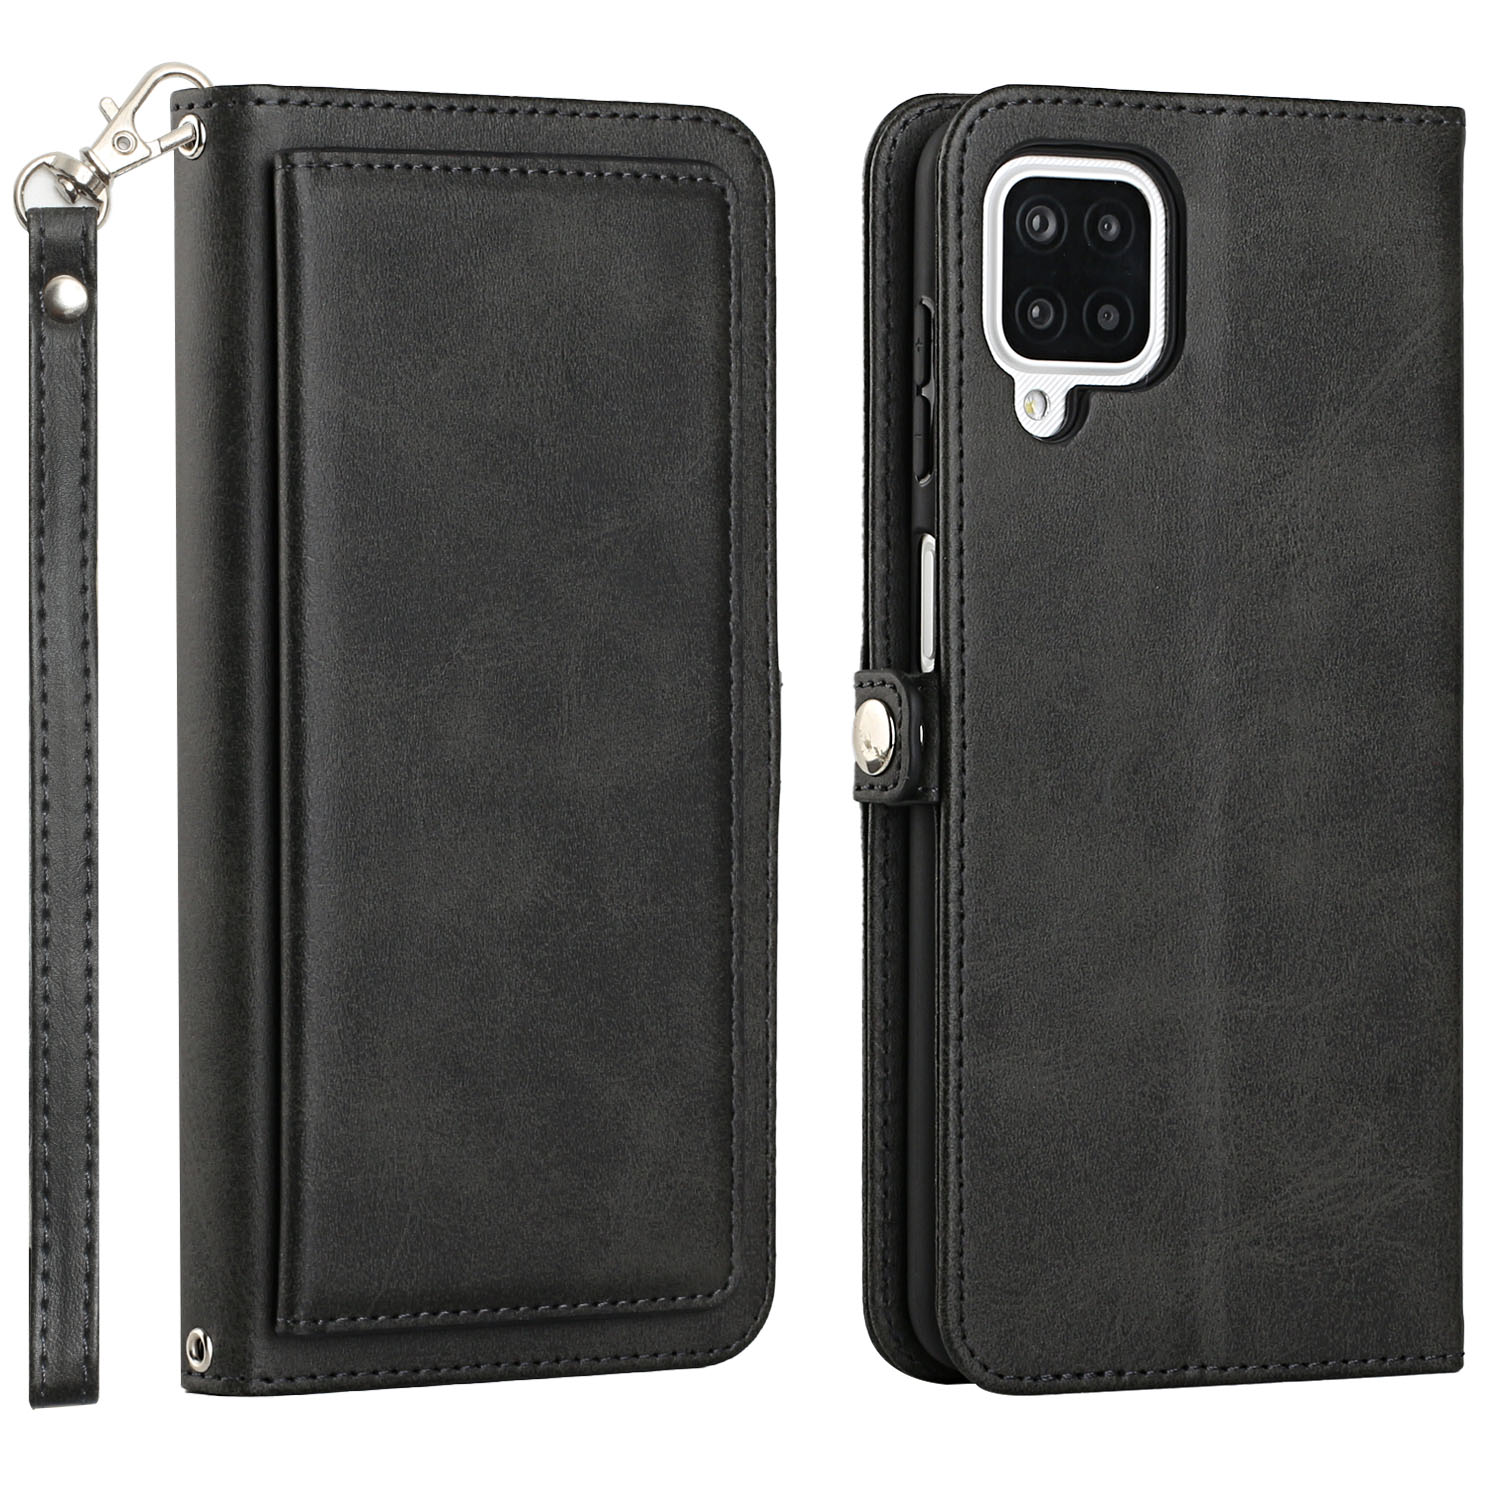 Premium PU Leather Folio WALLET Front Cover Case for Galaxy A12 (Black)